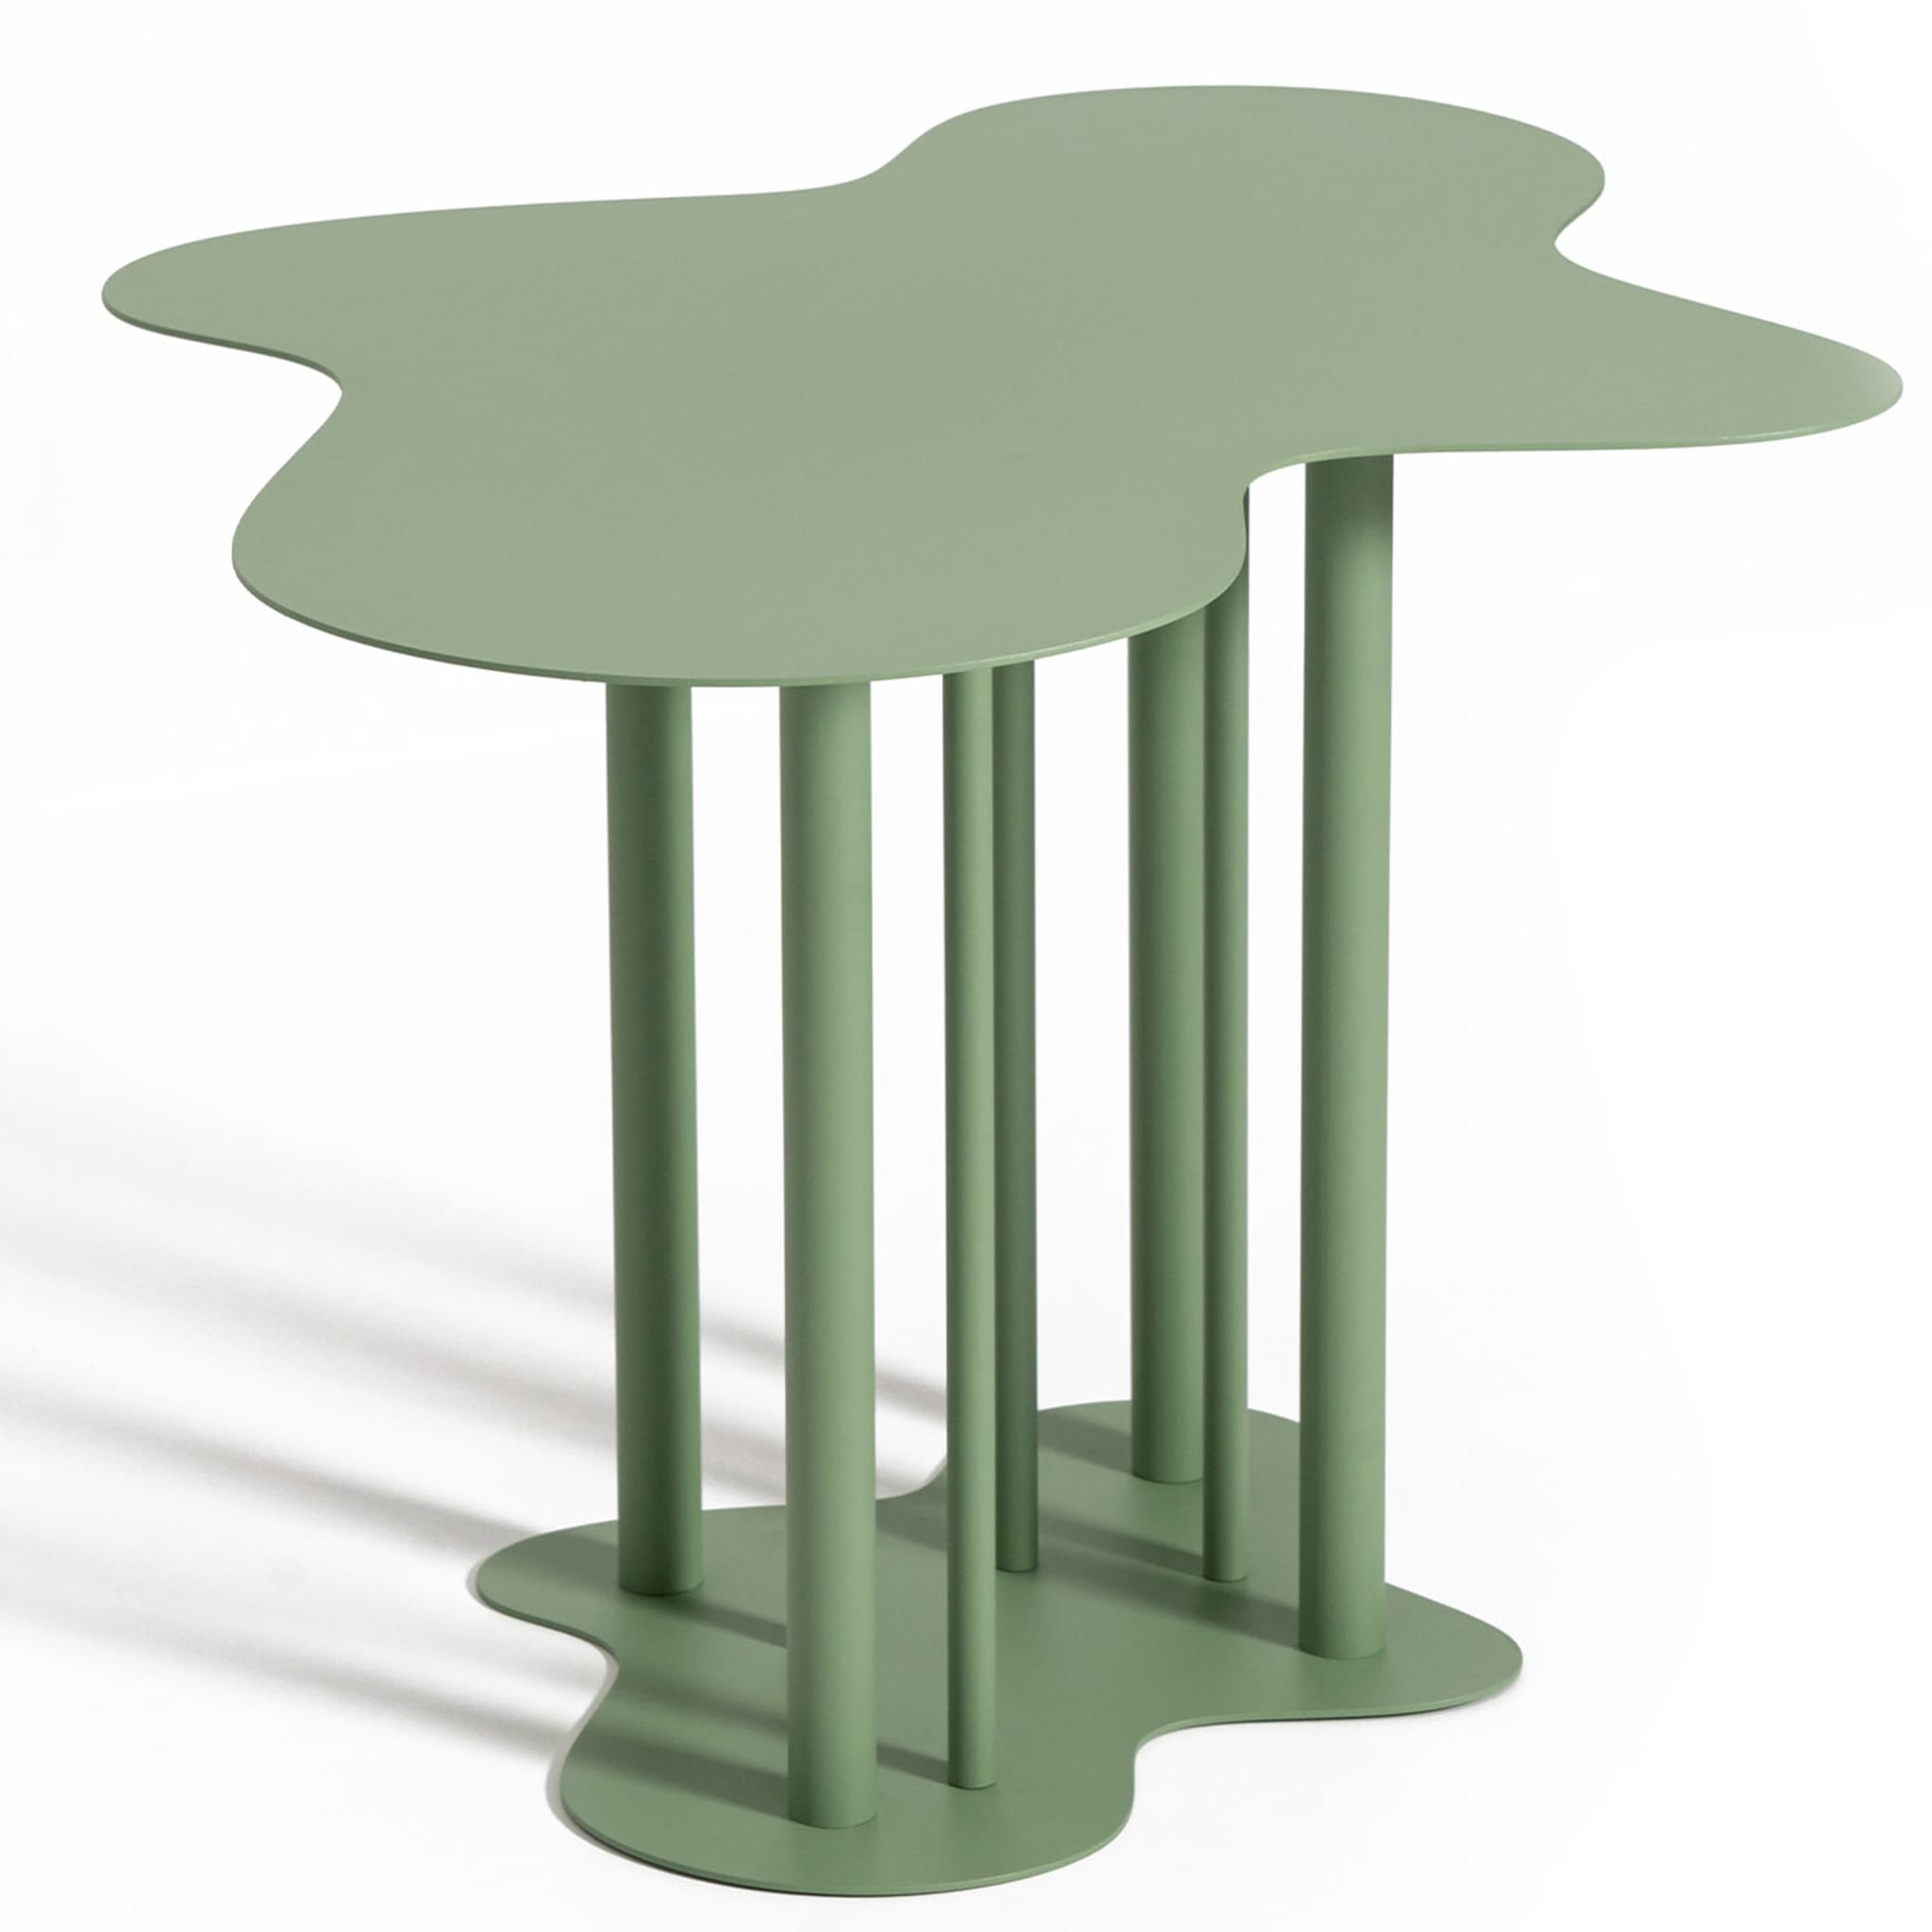 Nuvola 03 Pale Green Side Table by Mario Cucinella - Alternative view 1